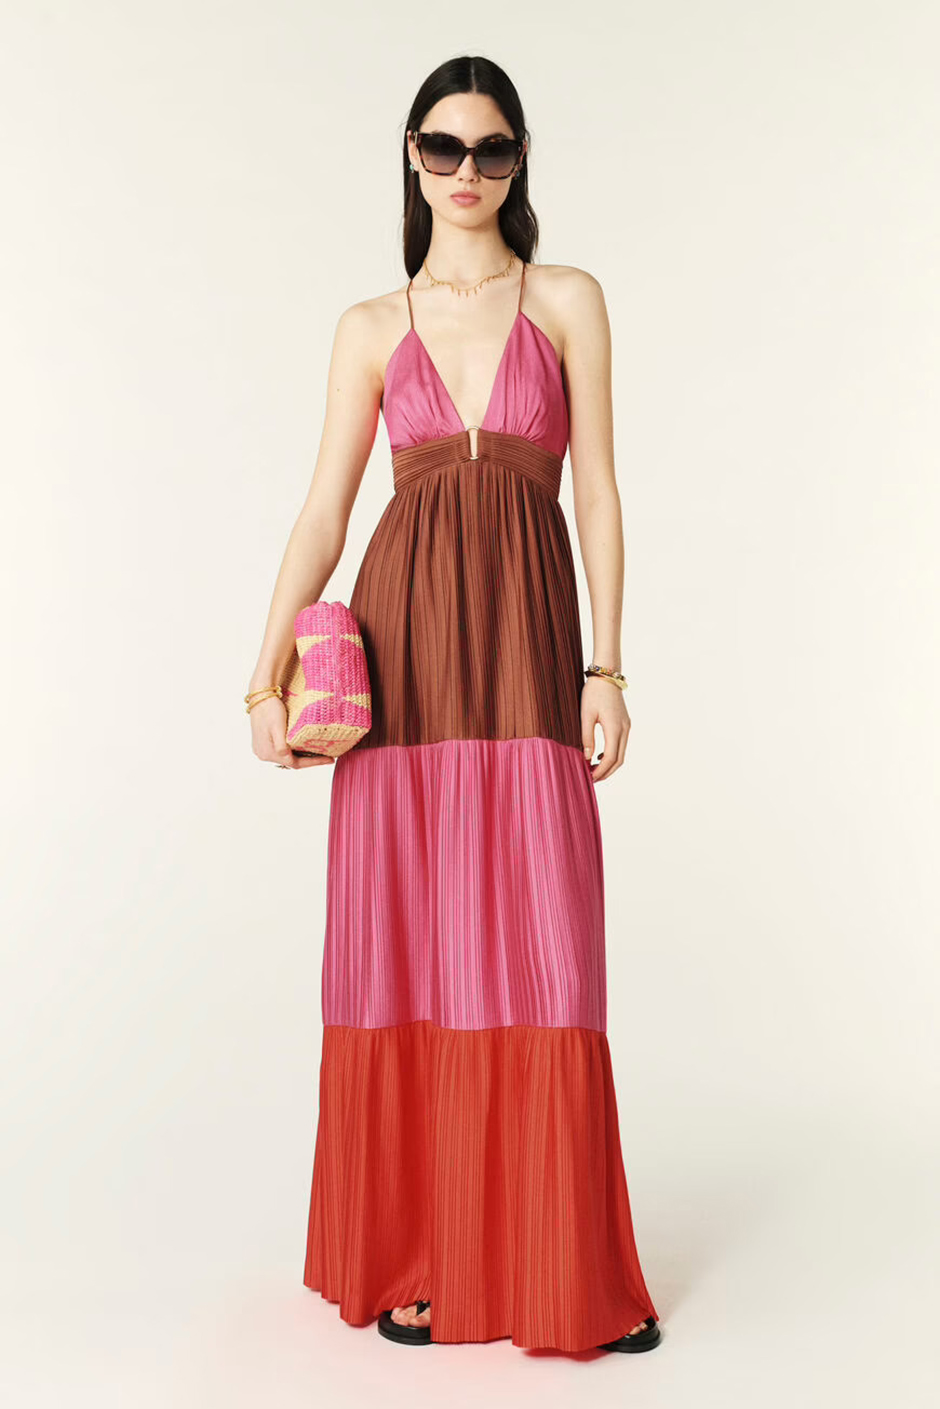 Maxi dress with plunge neckline and open back in brown, pink and red for summer wedding guest dress idea